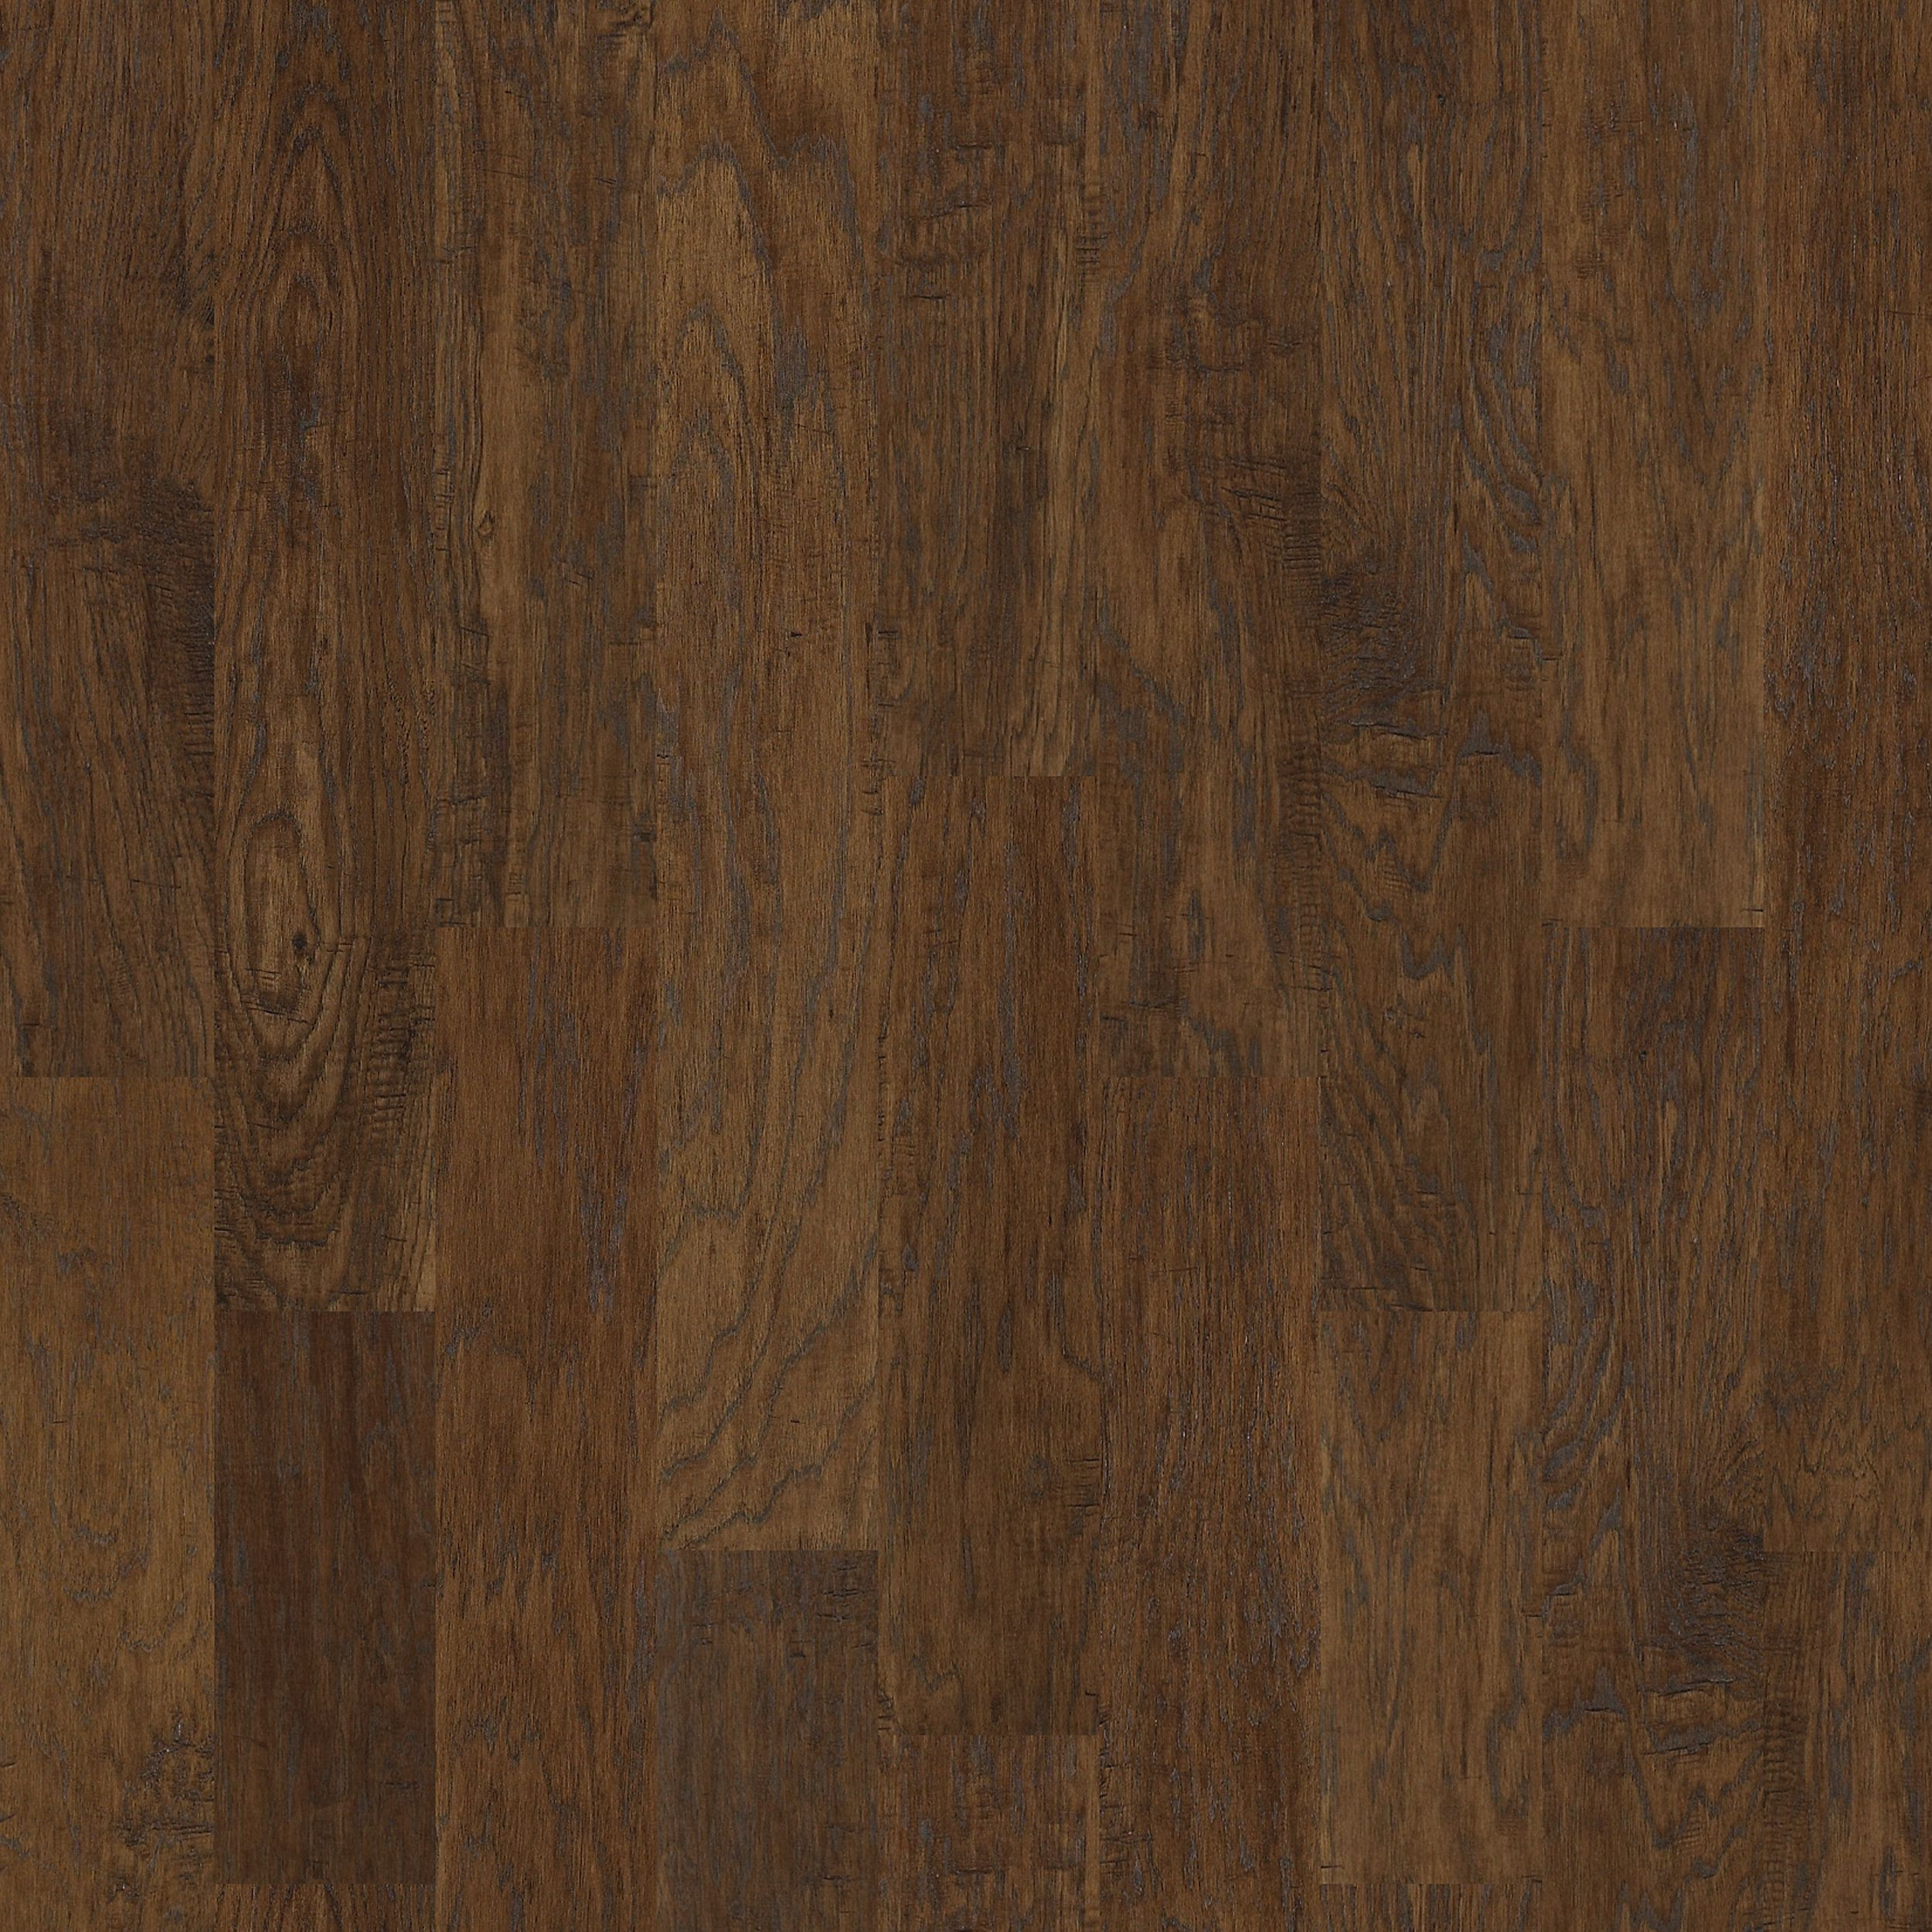 14 Great Hardwood Floor Installation Barrie 2024 free download hardwood floor installation barrie of this handscraped hickory wood flooring comes in a beautiful array of for this handscraped hickory wood flooring comes in a beautiful array of colors and